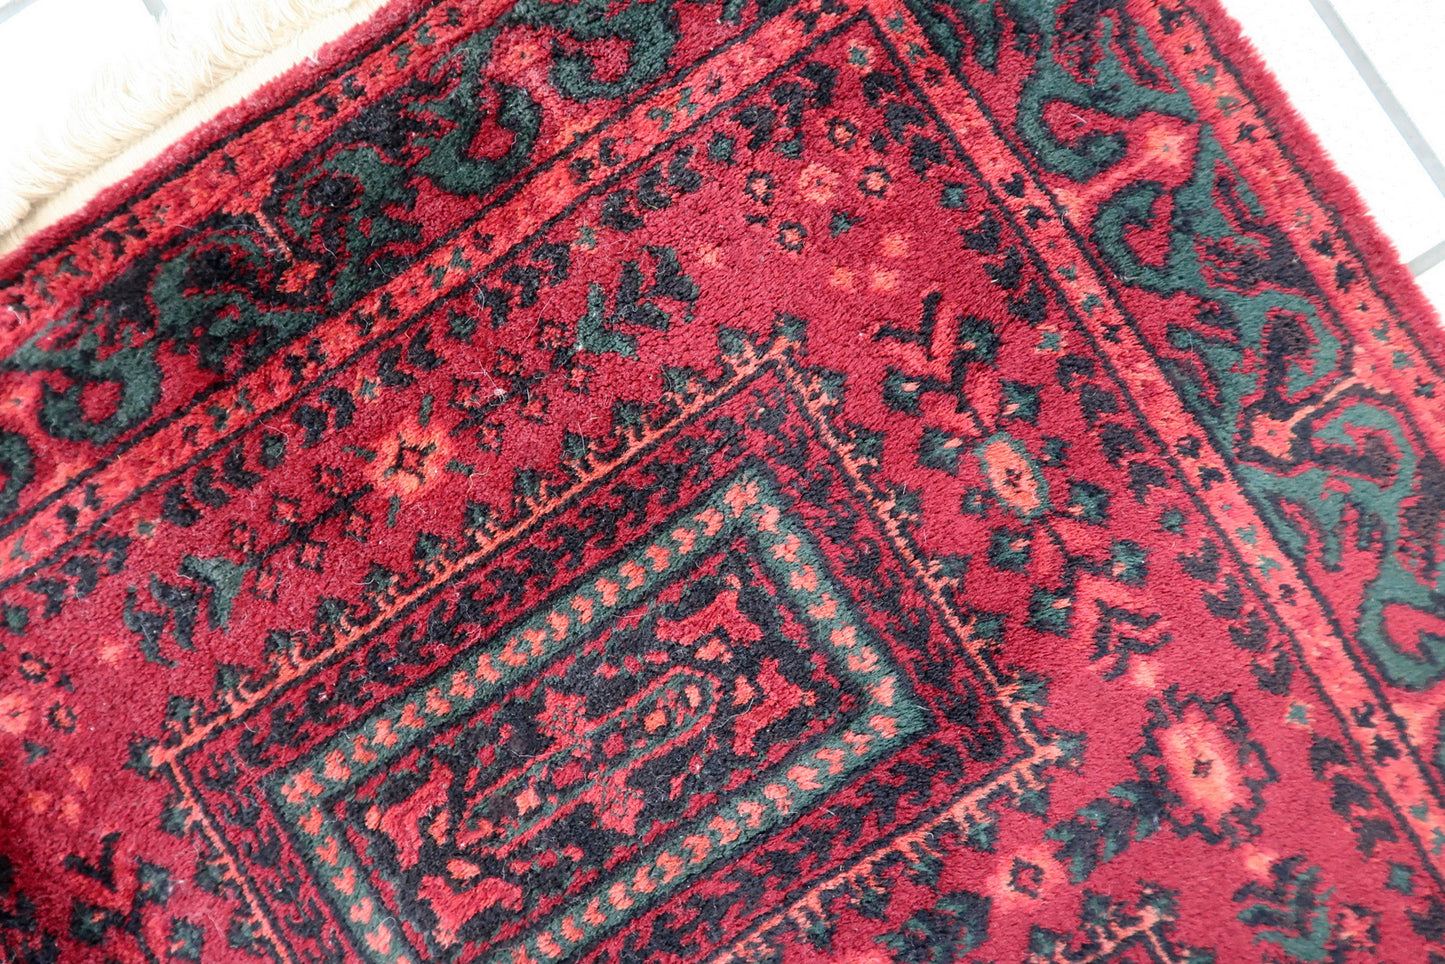 Vintage red woolen rug from Germany made in Baluch style. The rug is in deep red and emerald shades. It is from the middle of 20th century in original good condition.